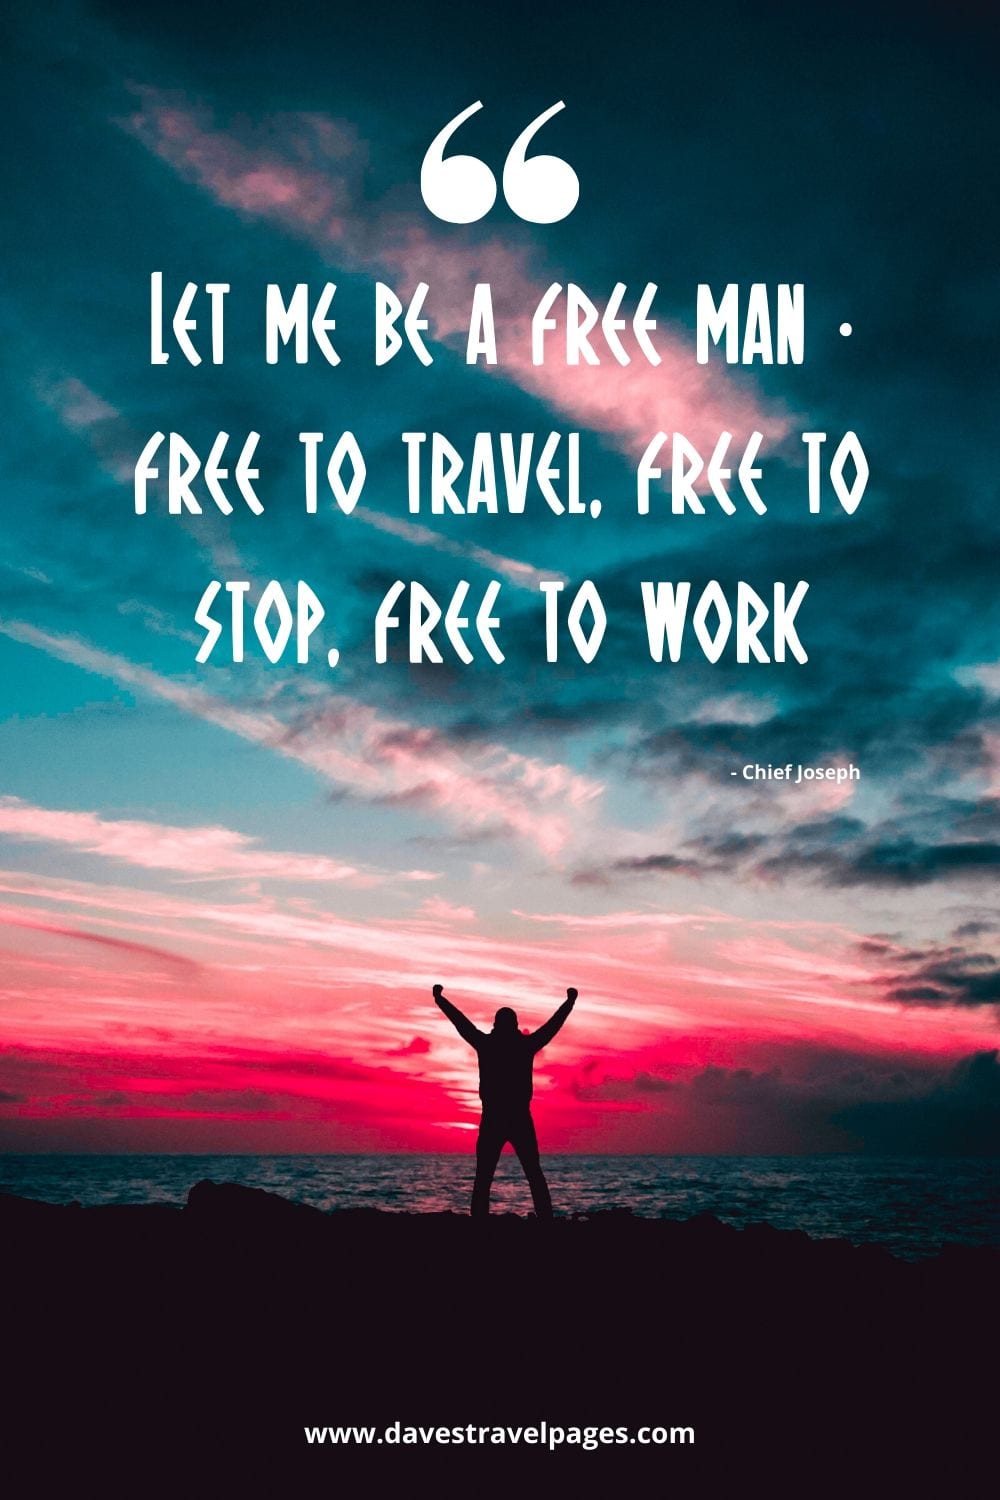 Let me be a free man - free to travel, free to stop, free to work. Chief Joseph